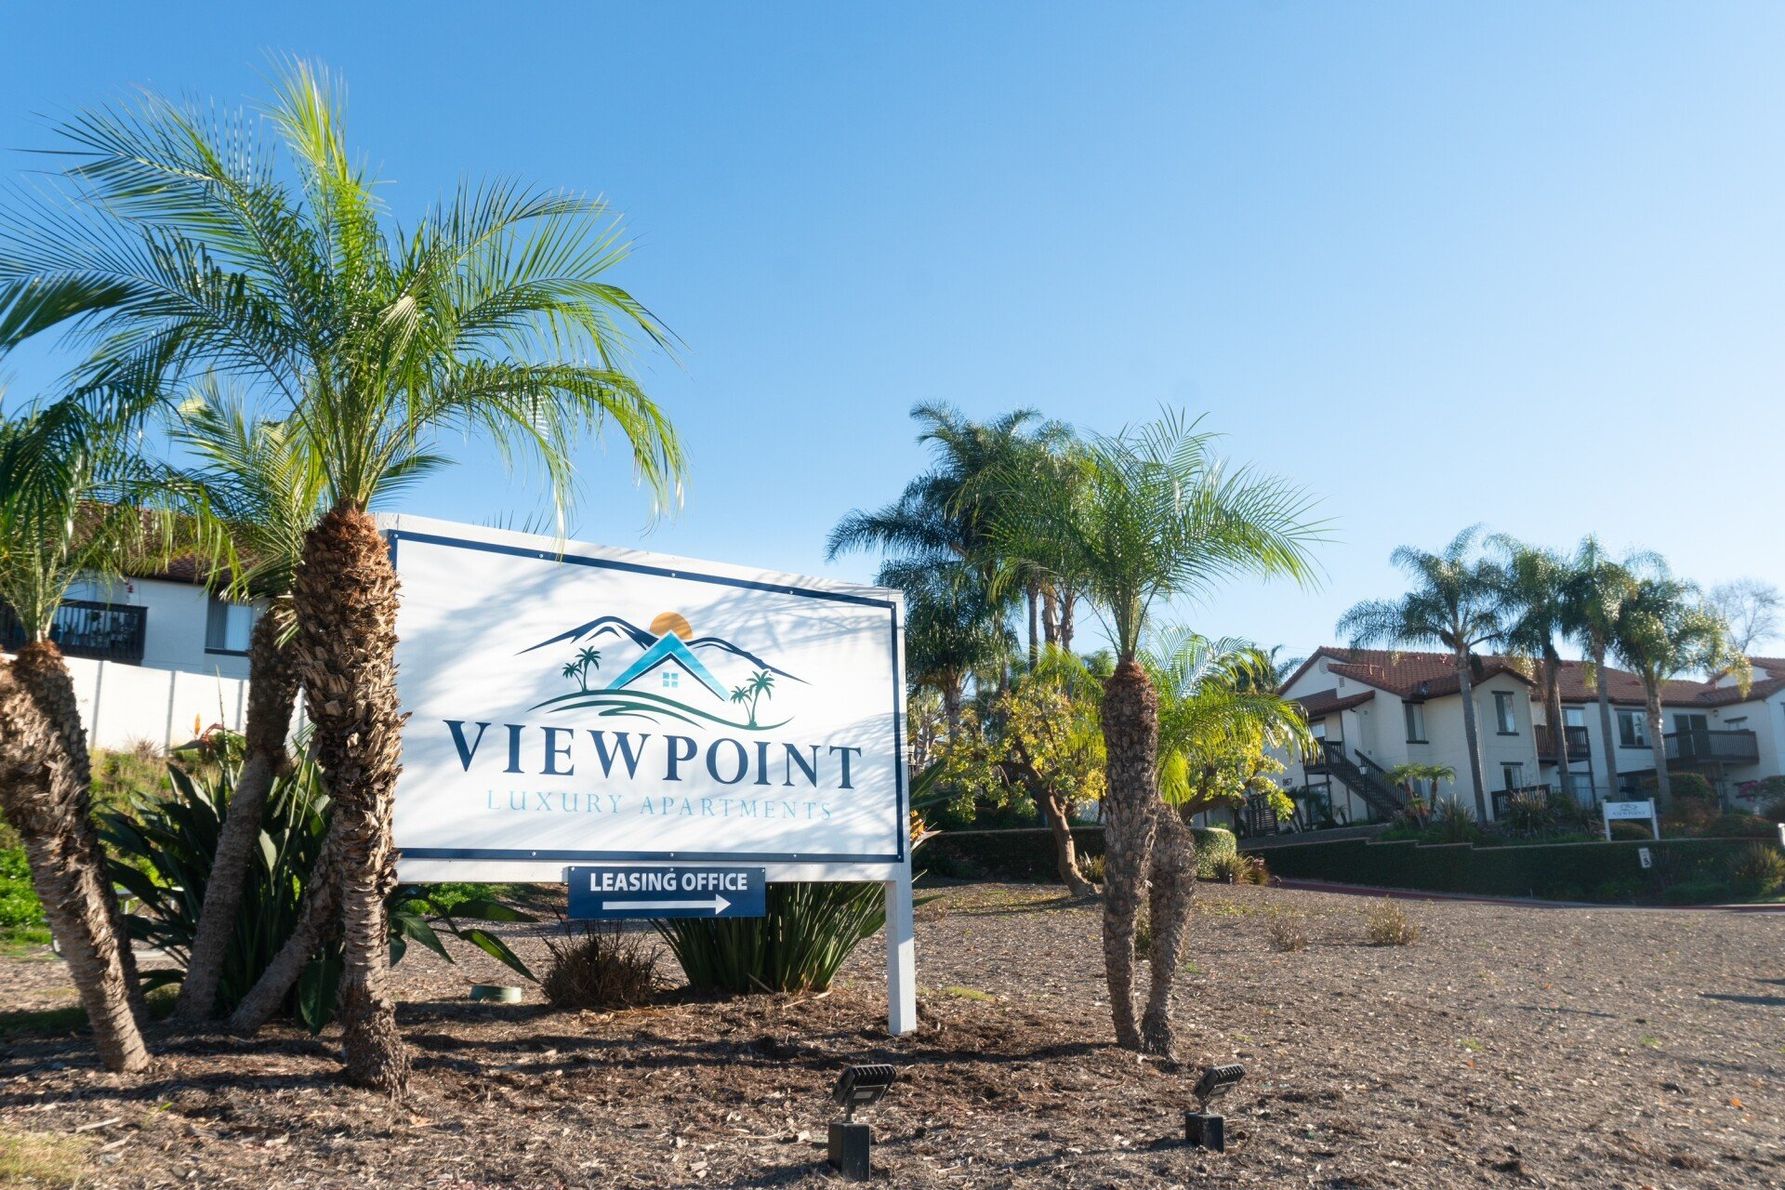 Viewpoint Luxury Apartments sign